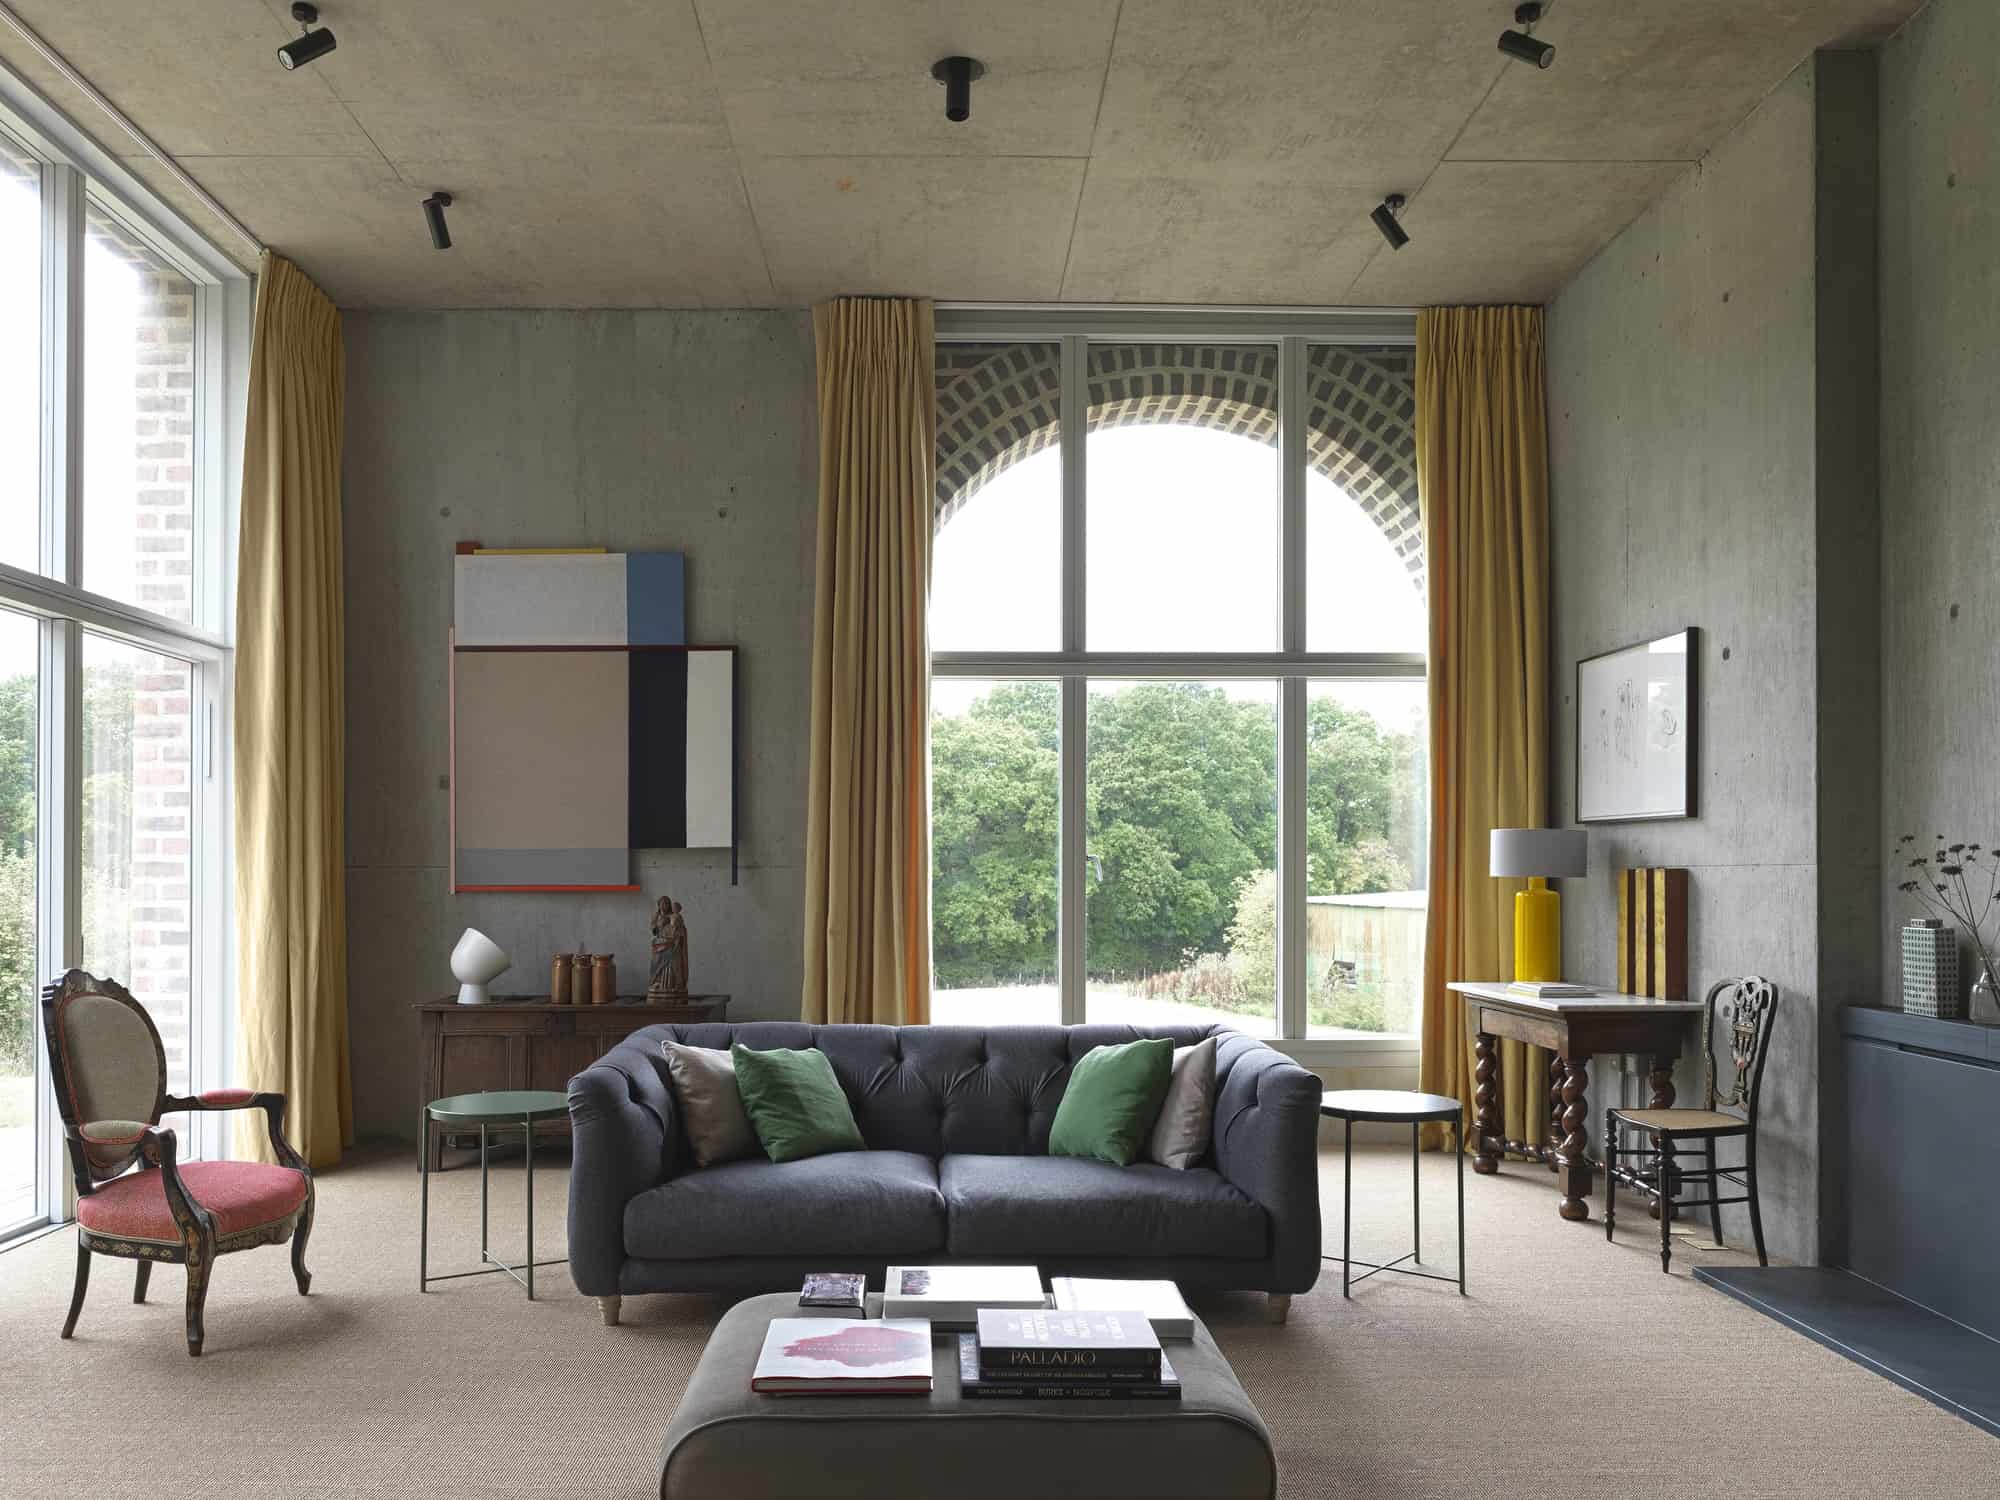 Upperton GU28 - An individual and imposing architect designed country home with incredible interiors of concrete and contemporary art - The Location Guys